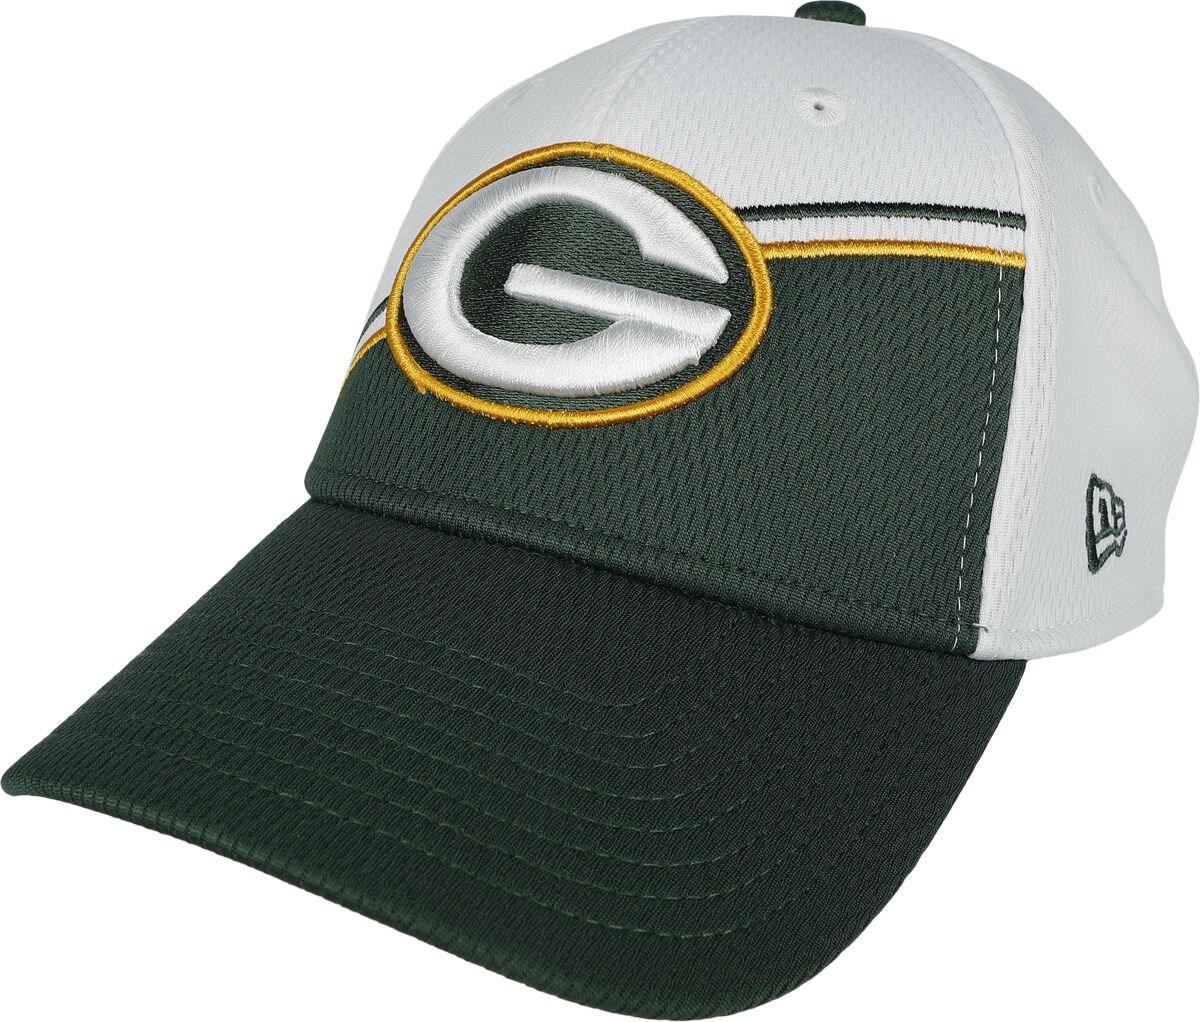 Image of Cappello di New Era - NFL - 9FORTY Green Bay Packers Sideline - Unisex - multicolore